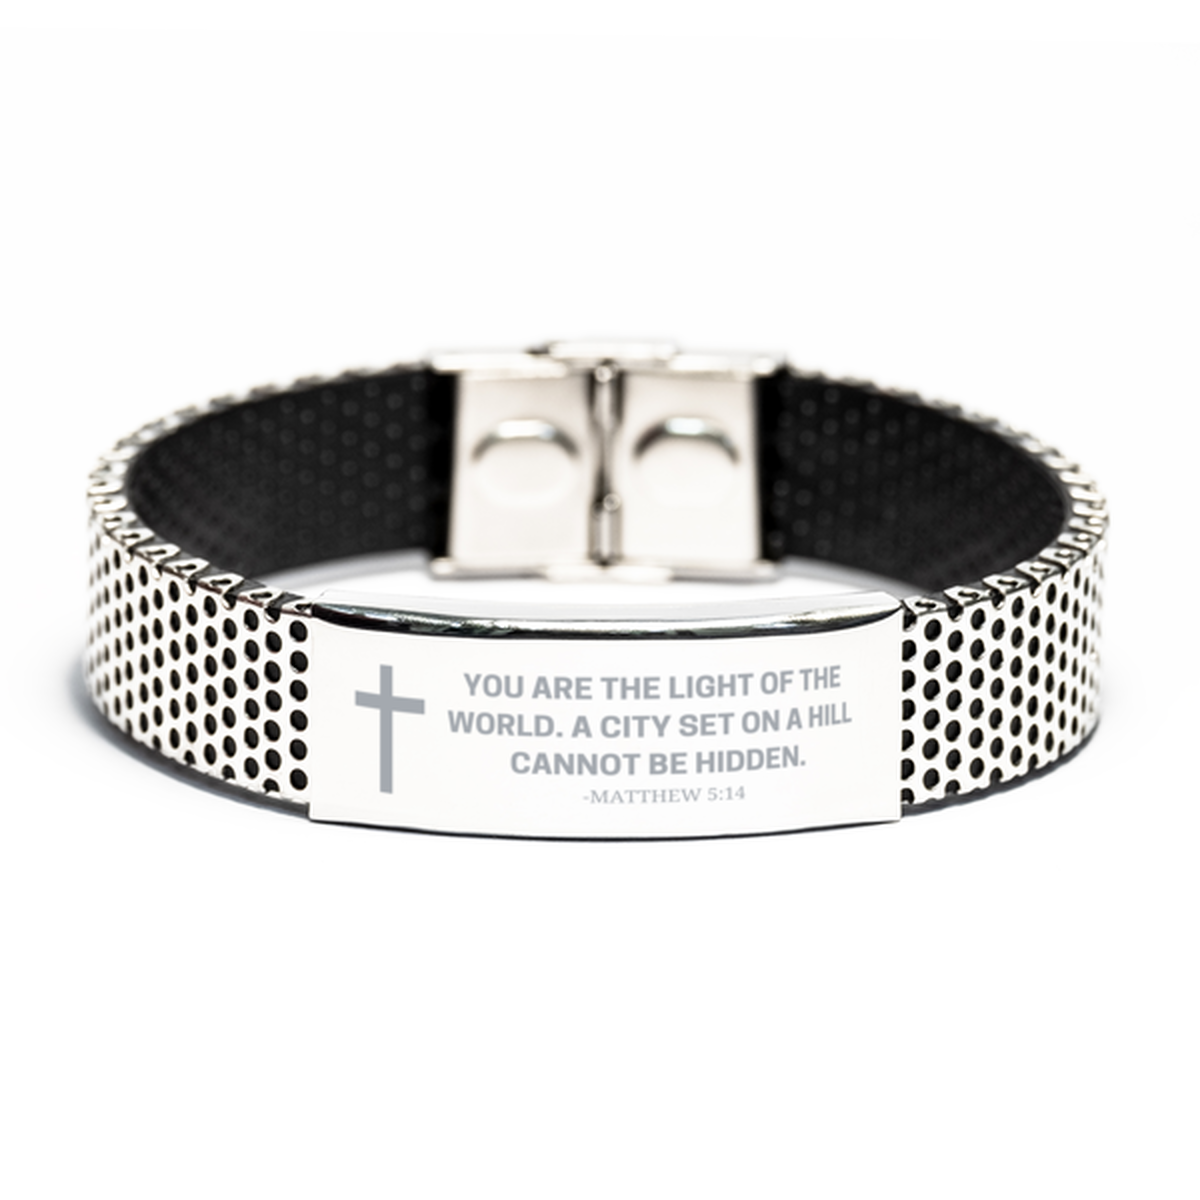 Baptism Gifts For Teenage Boys Girls, Christian Bible Verse Stainless Steel Bracelet, You are the light of the world, Catholic Confirmation Gifts for Son, Godson, Grandson, Nephew